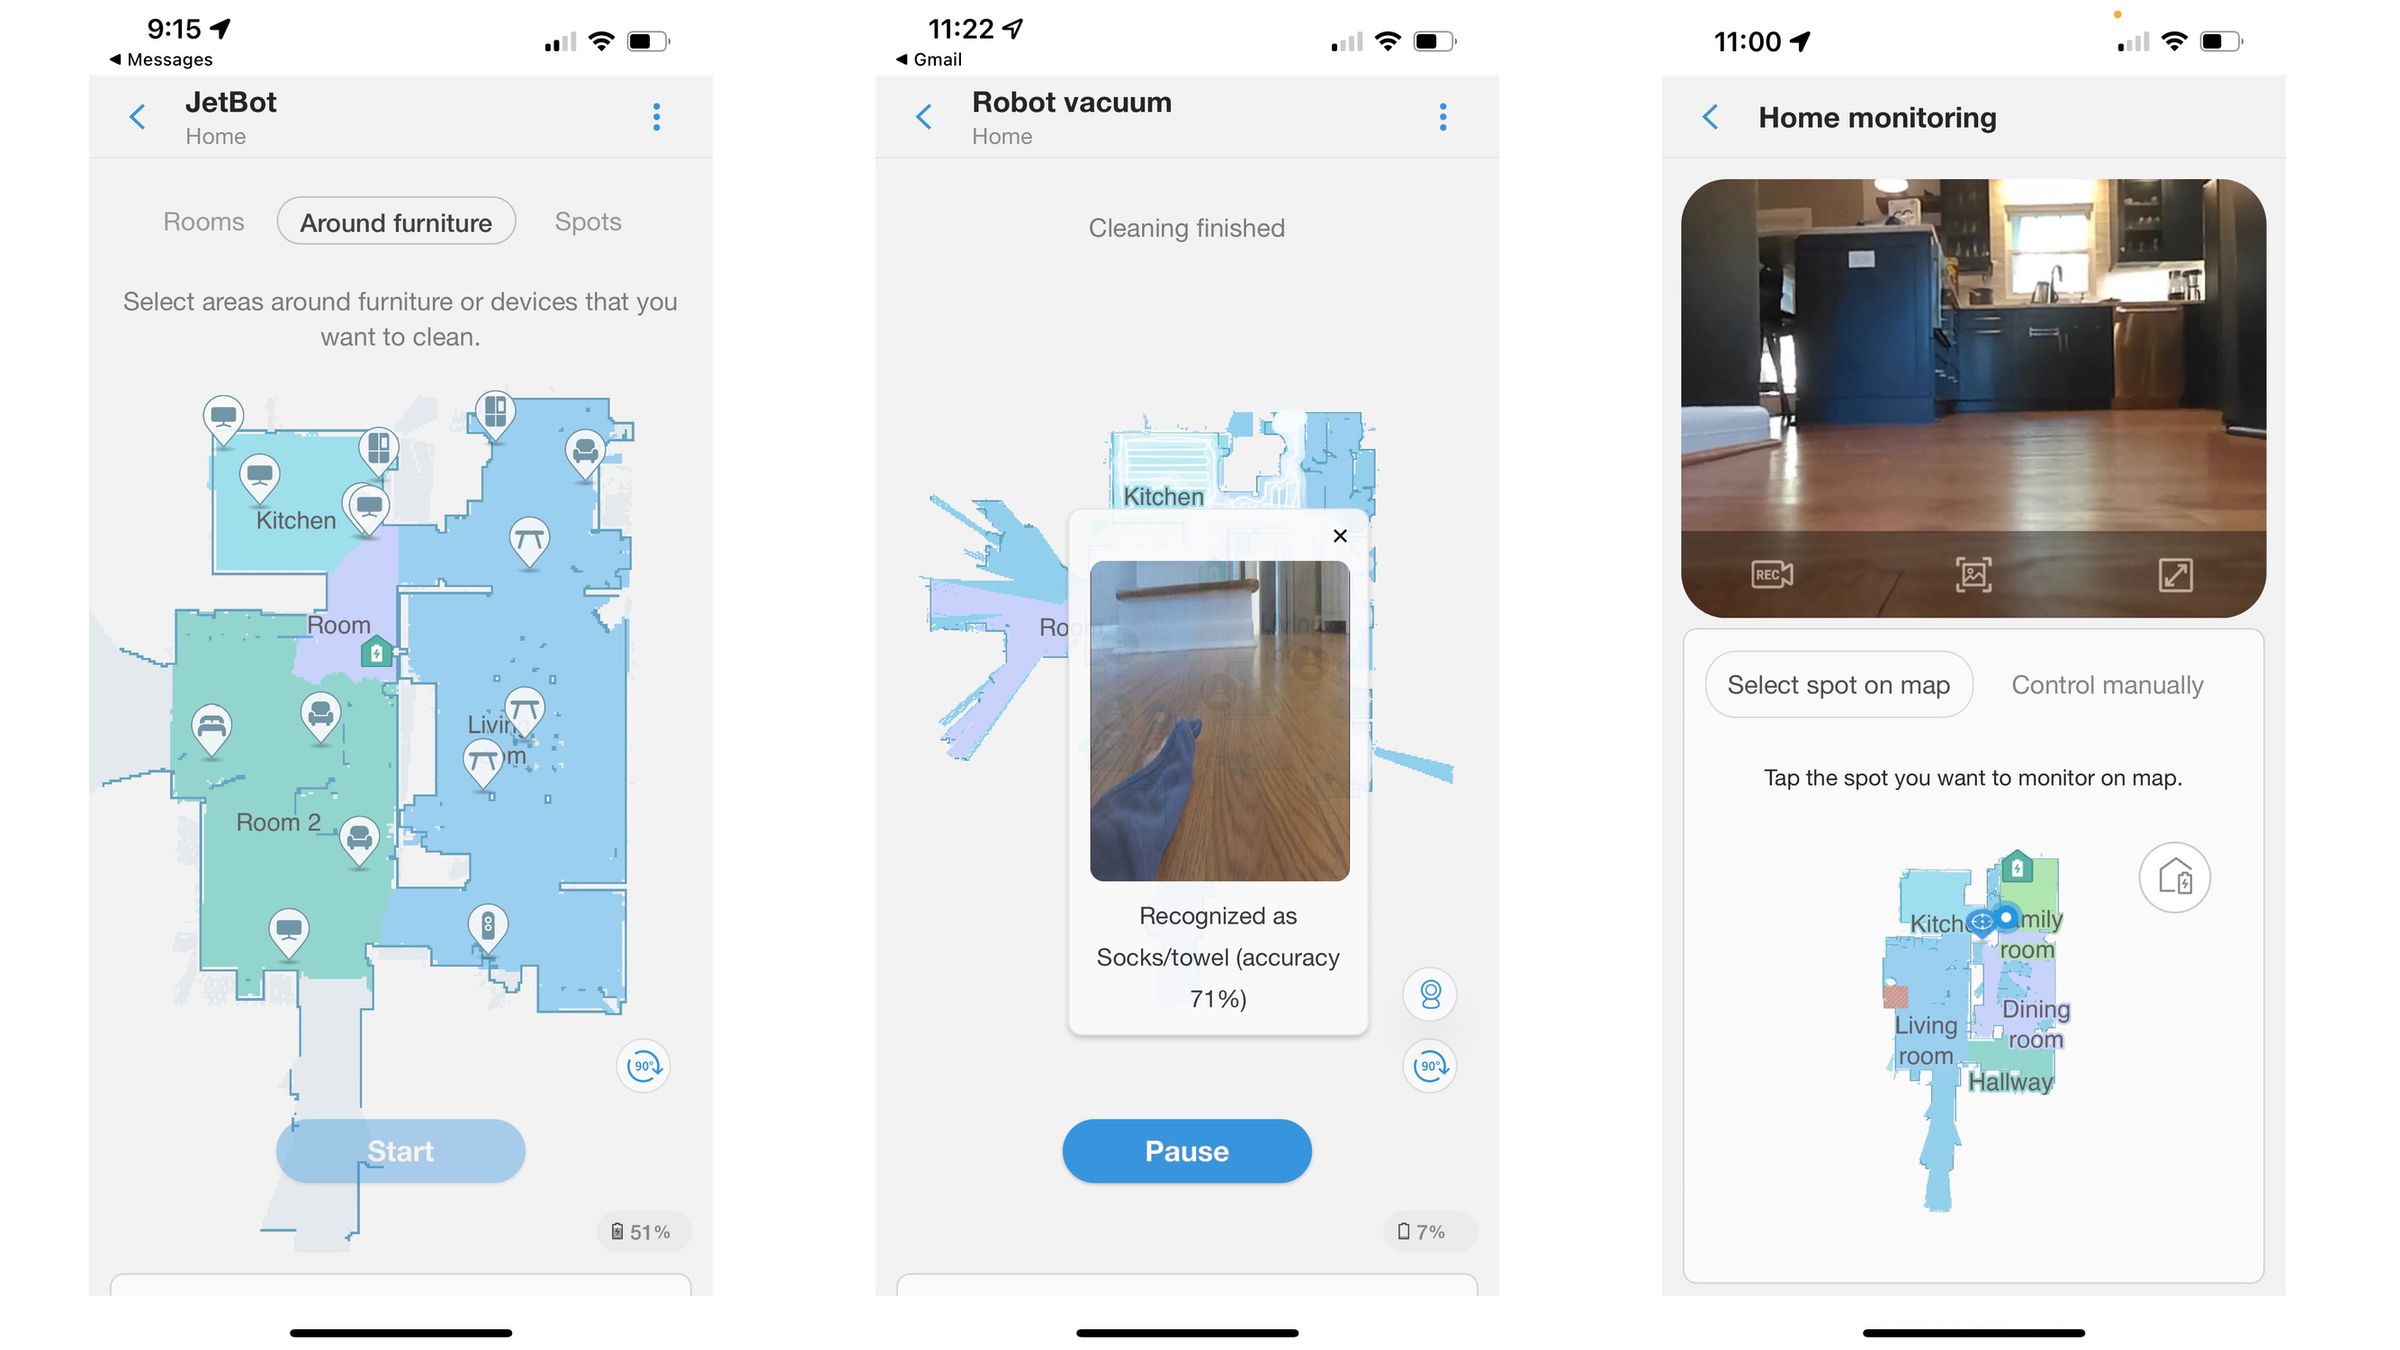 The Jet Bot is controlled through the SmartThings app. The map shows the layout of the test space, including furniture and appliances it thinks are there. It also pops up an image of any obstacle in the cleaning report. You can also view the robot’s camera feed here. 